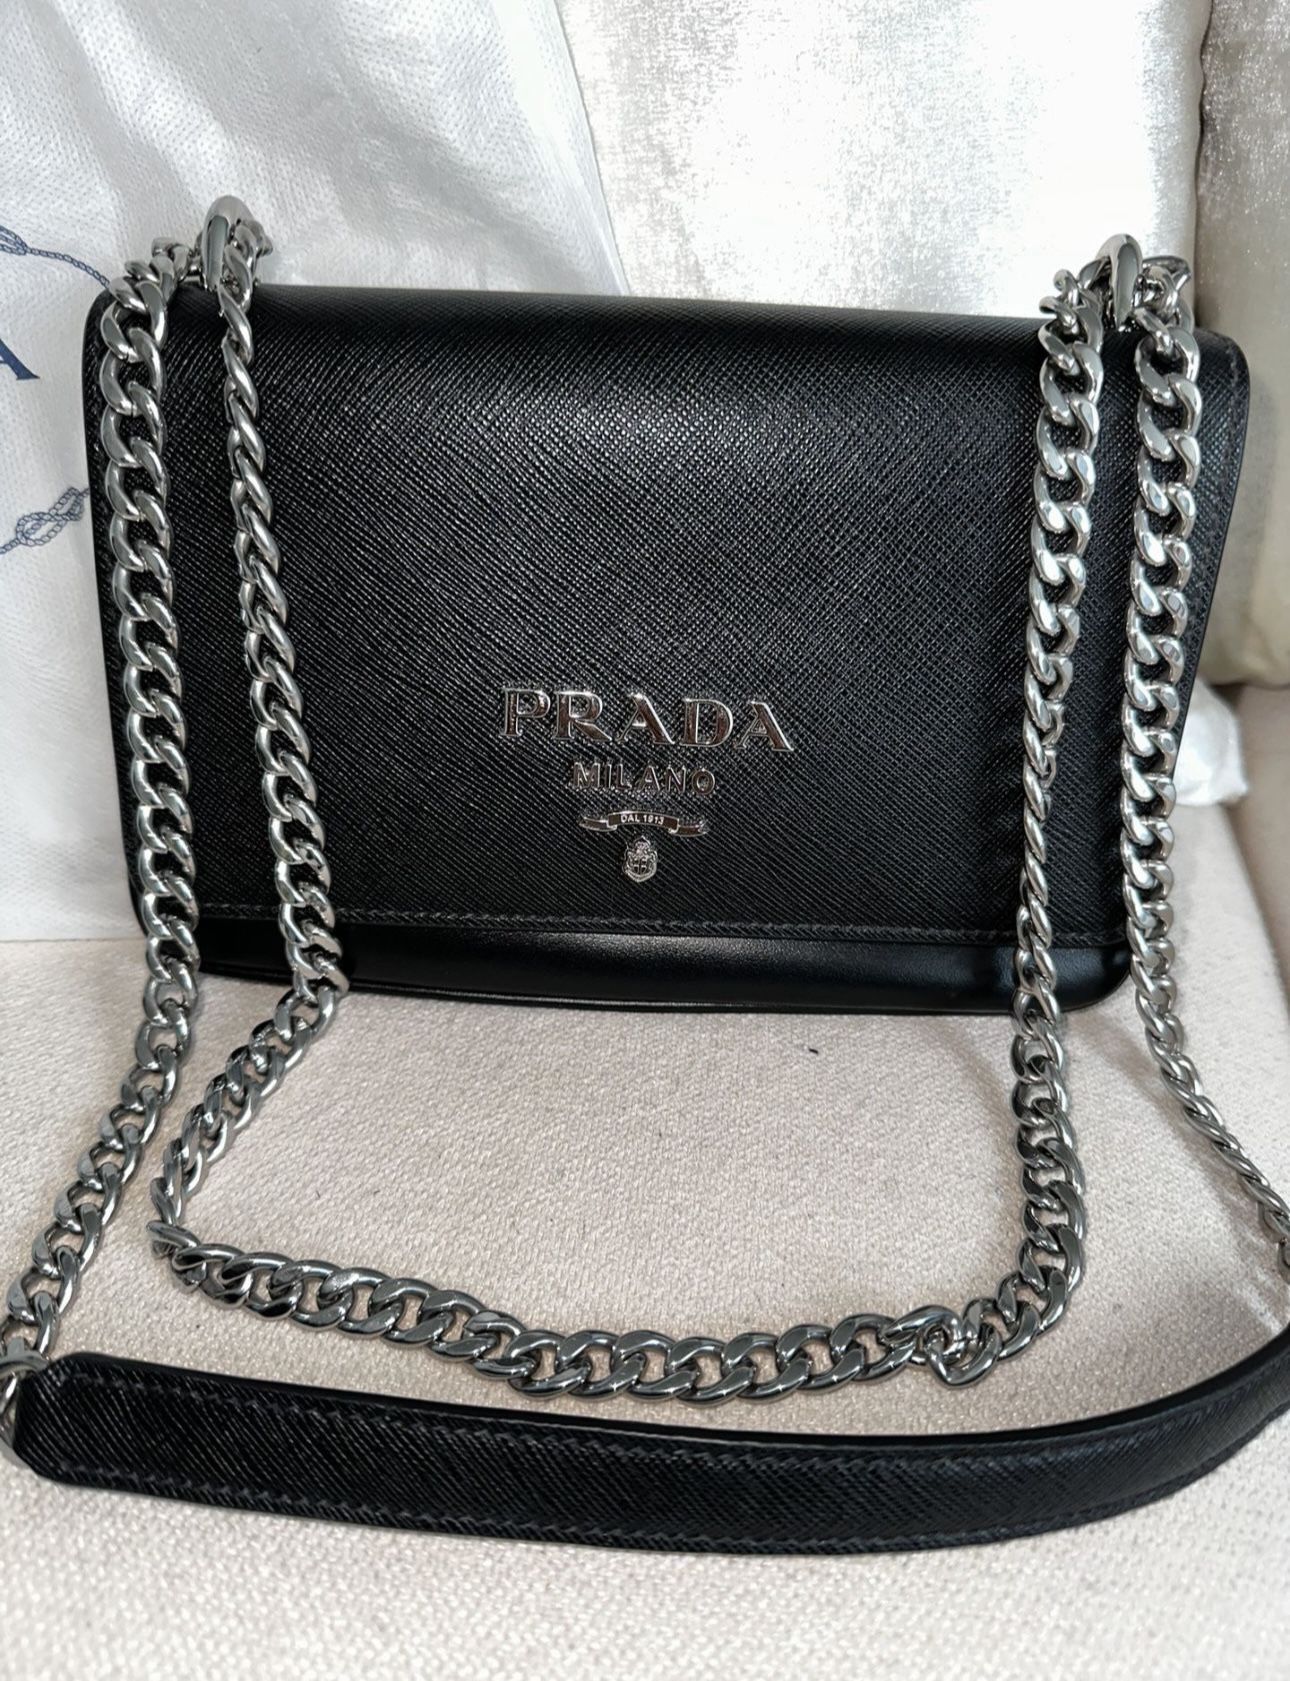 Prada Double Saffiano Cur Talco Leather Large Tote Bag Cream for Sale in  Oceanside, CA - OfferUp